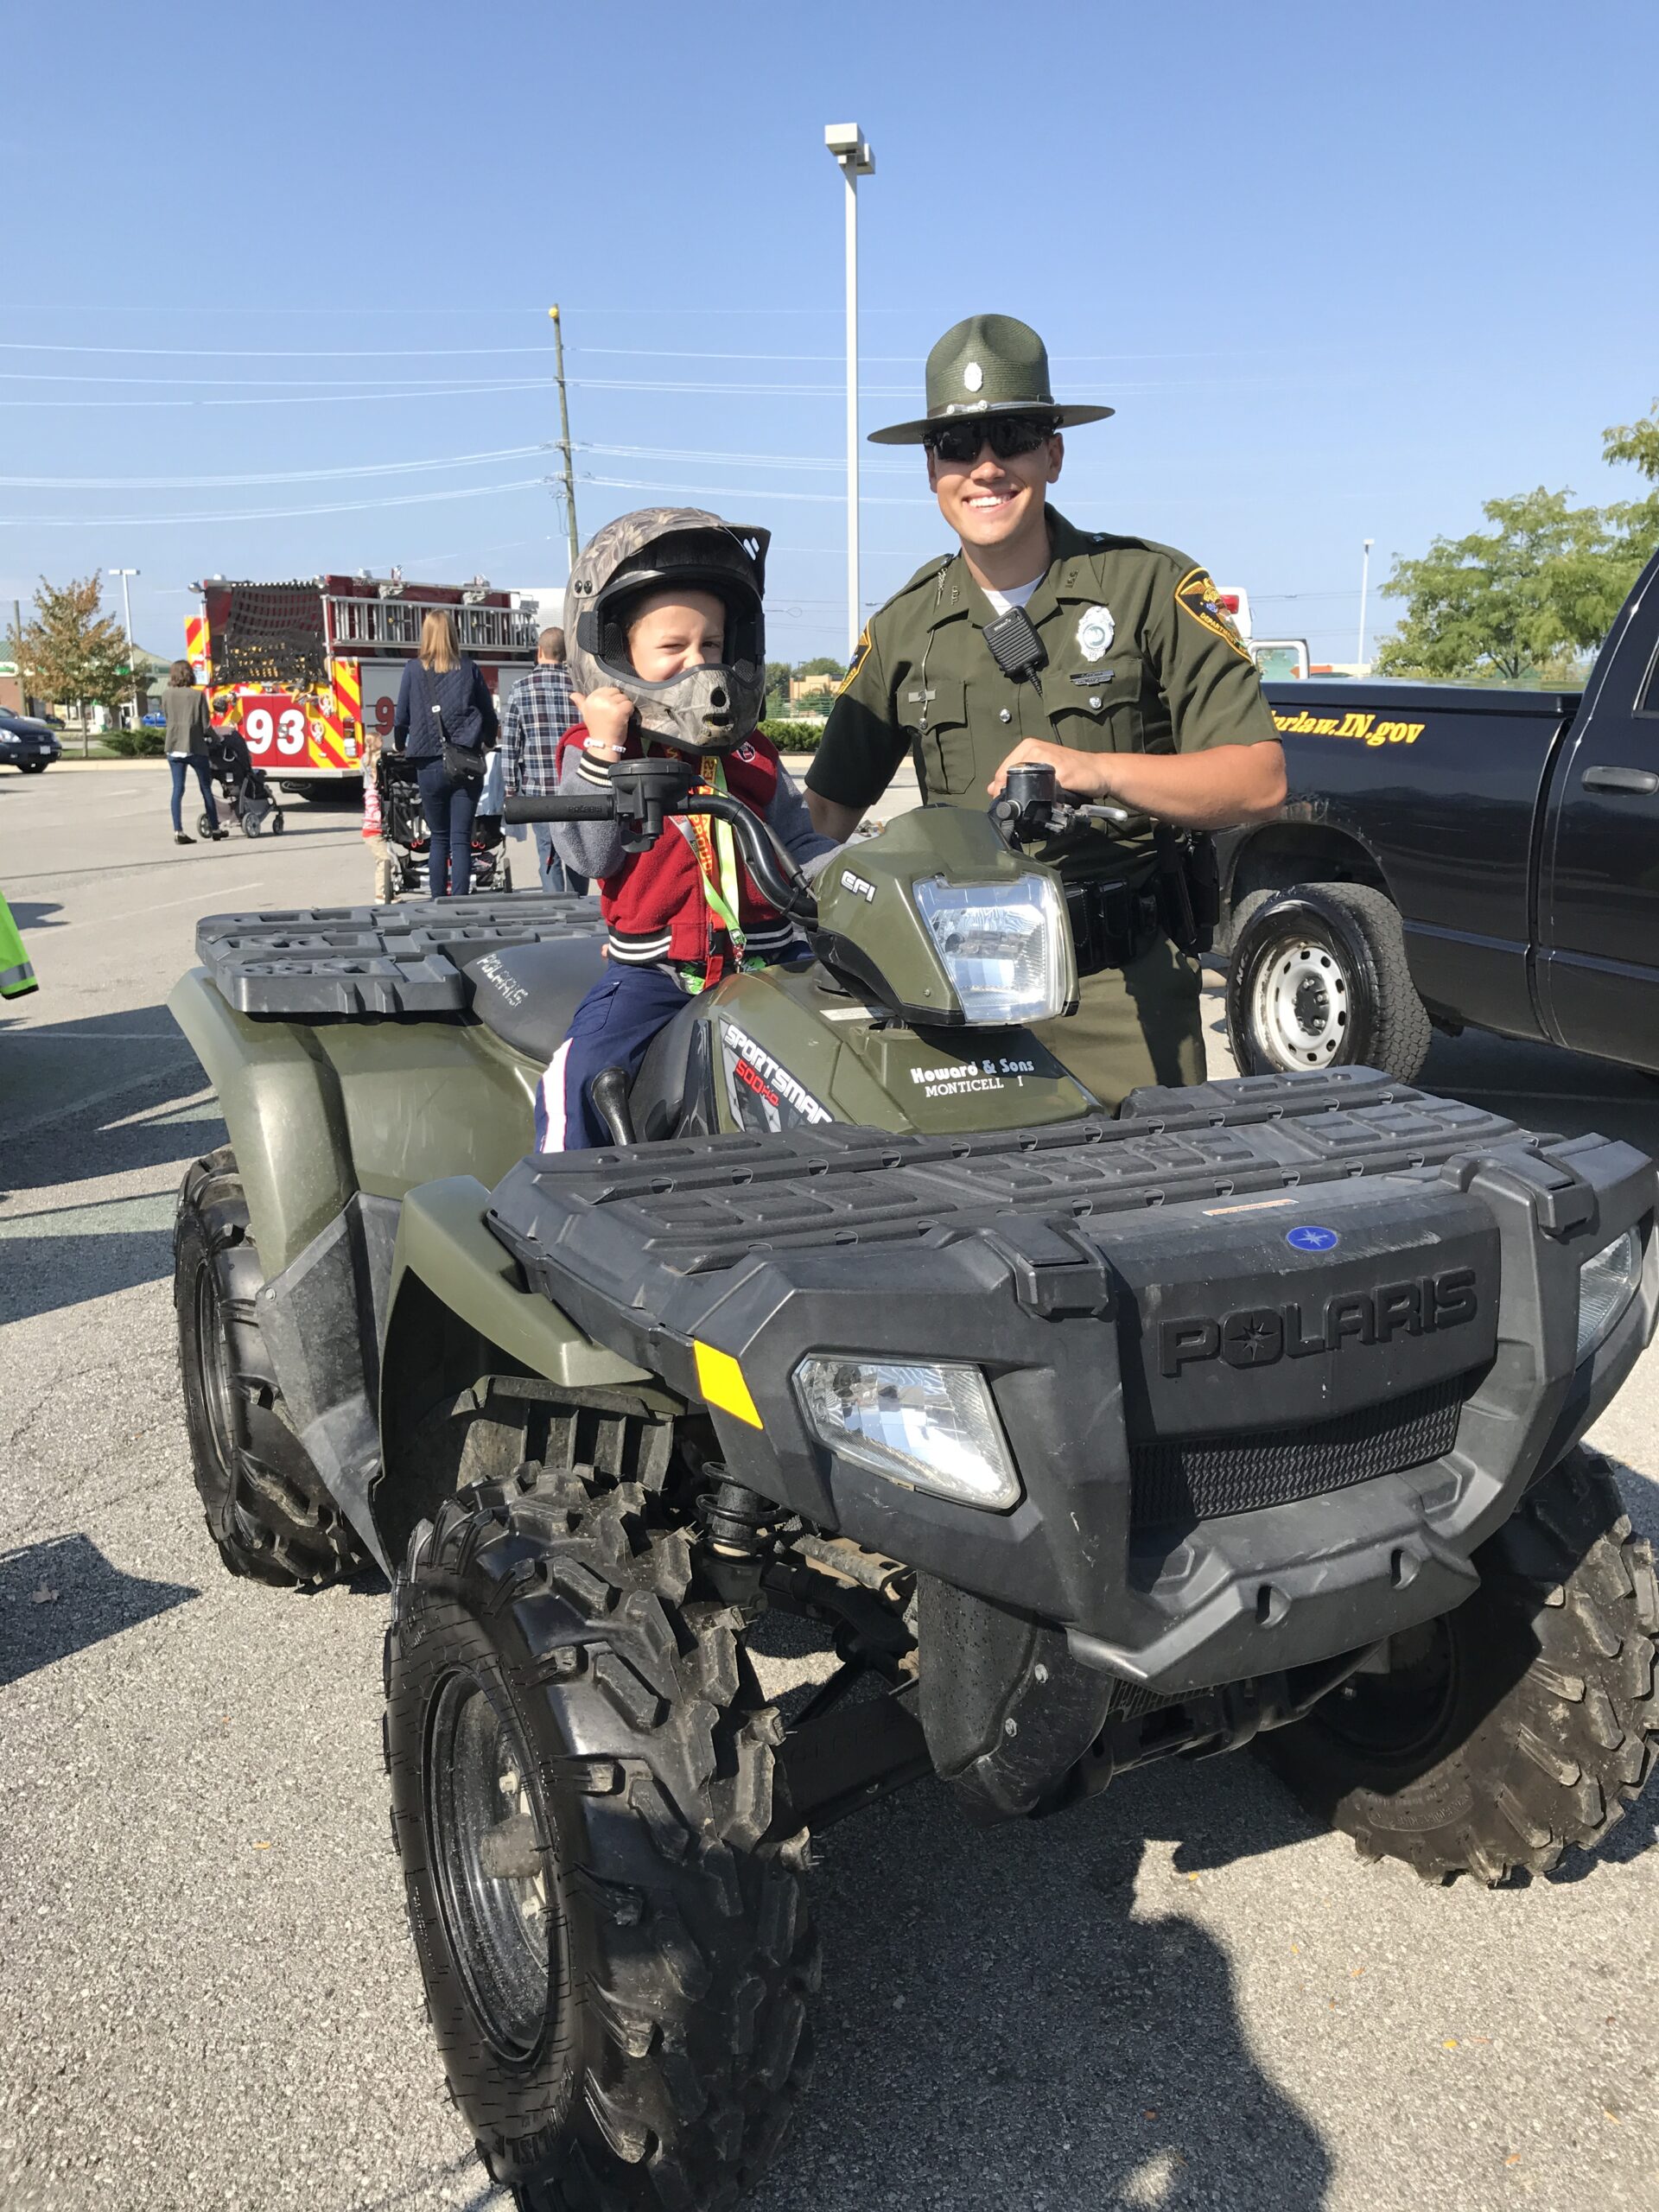 Highway Patrol Officer with a kid